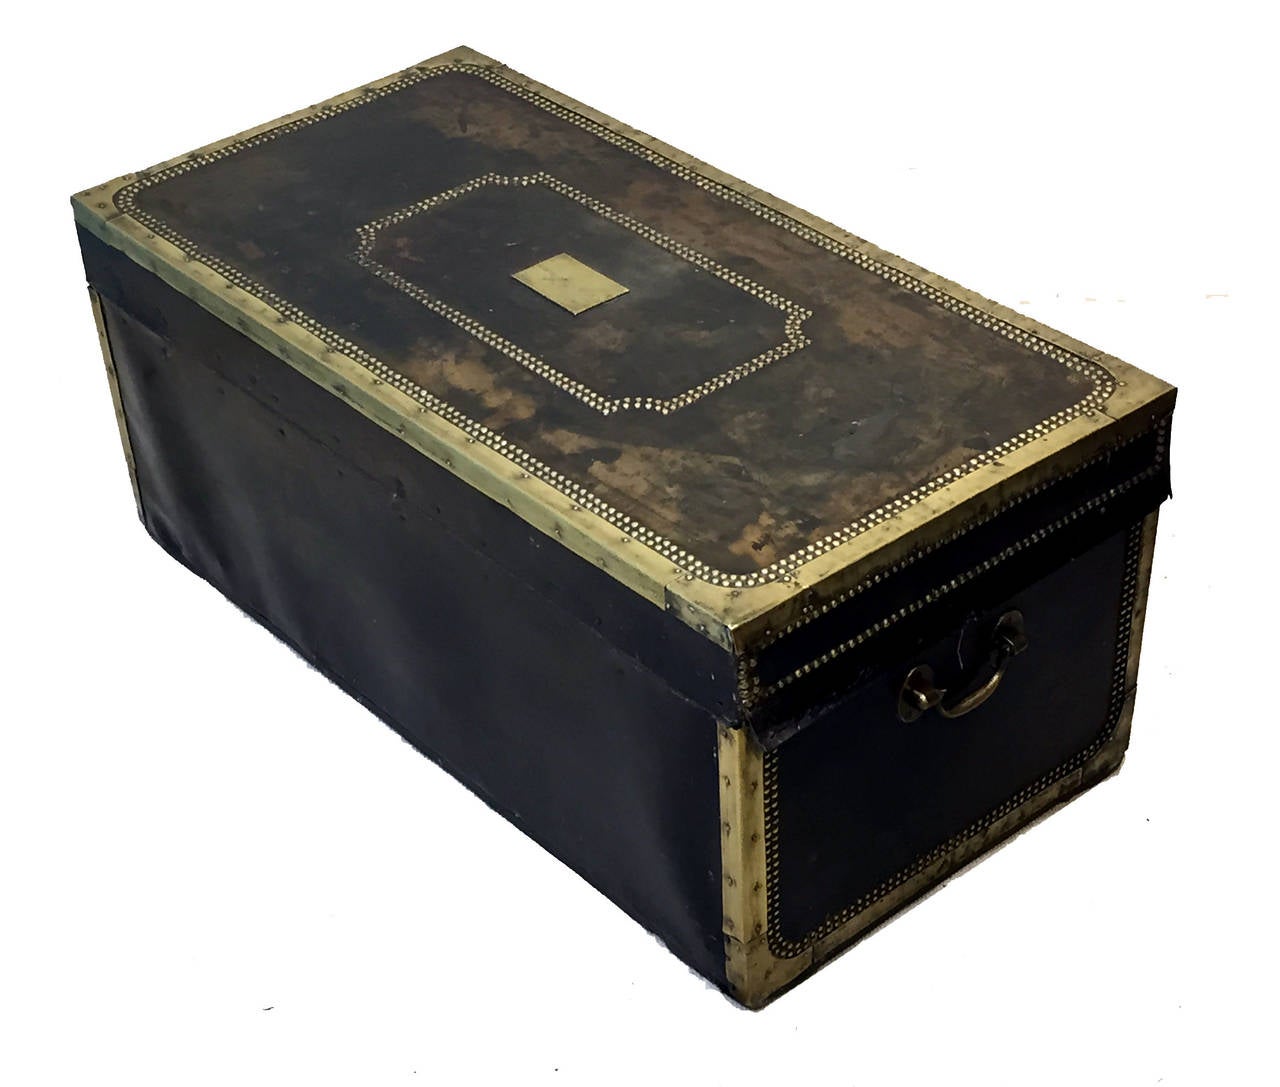 A rare and delightful mid-19th century leather and camphor wood
military campaign trunk having original brass bound decoration
and carrying handles.